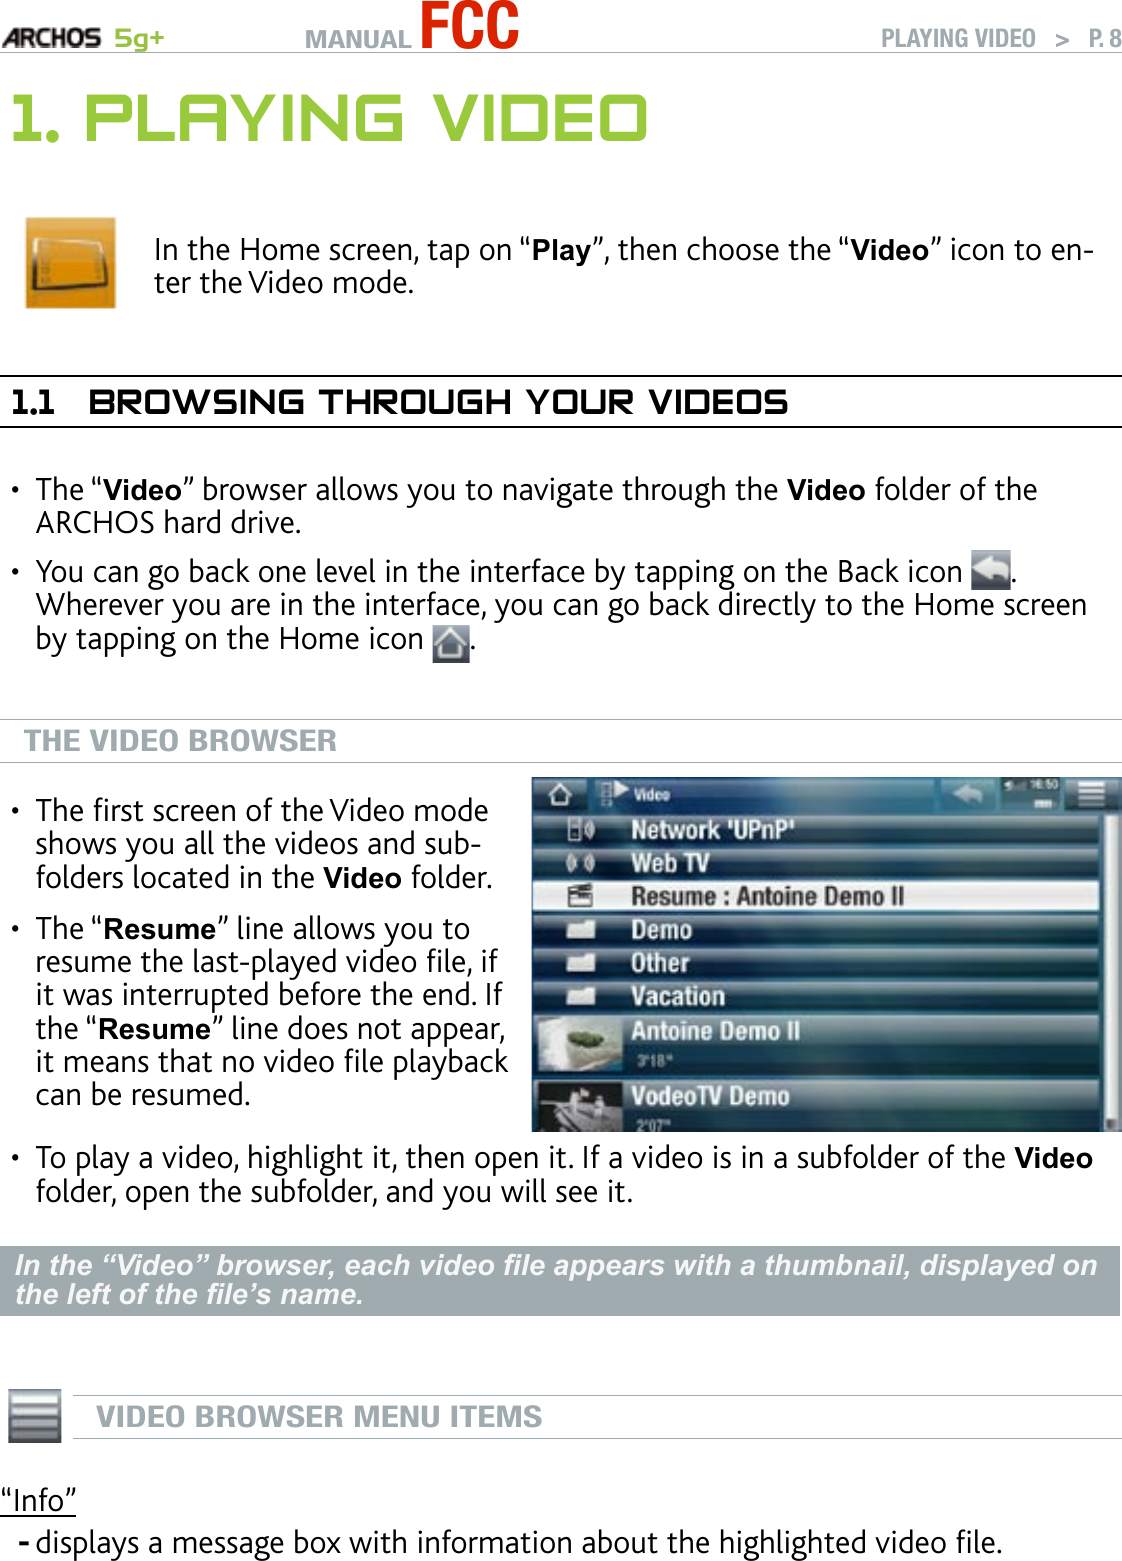 MANUAL FCC 5g+ PLAYING VIDEO   &gt;   P. 81. PlayIng VIdeOIn the Home screen, tap on “Play”, then choose the “Video” icon to en-ter the Video mode.1.1  brOwsIng ThrOugh yOur VIdeOsThe “Video” browser allows you to navigate through the Video folder of the ARCHOS hard drive.You can go back one level in the interface by tapping on the Back icon  . Wherever you are in the interface, you can go back directly to the Home screen by tapping on the Home icon  .THE VIDEO BROWSERThe rst screen of the Video mode shows you all the videos and sub-folders located in the Video folder.The “Resume” line allows you to resume the last-played video le, if it was interrupted before the end. If the “Resume” line does not appear, it means that no video le playback can be resumed.••To play a video, highlight it, then open it. If a video is in a subfolder of the Video folder, open the subfolder, and you will see it.In the “Video” browser, each video le appears with a thumbnail, displayed on the left of the le’s name.  VIDEO BROWSER MENU ITEMS“Info”displays a message box with information about the highlighted video le.•••-